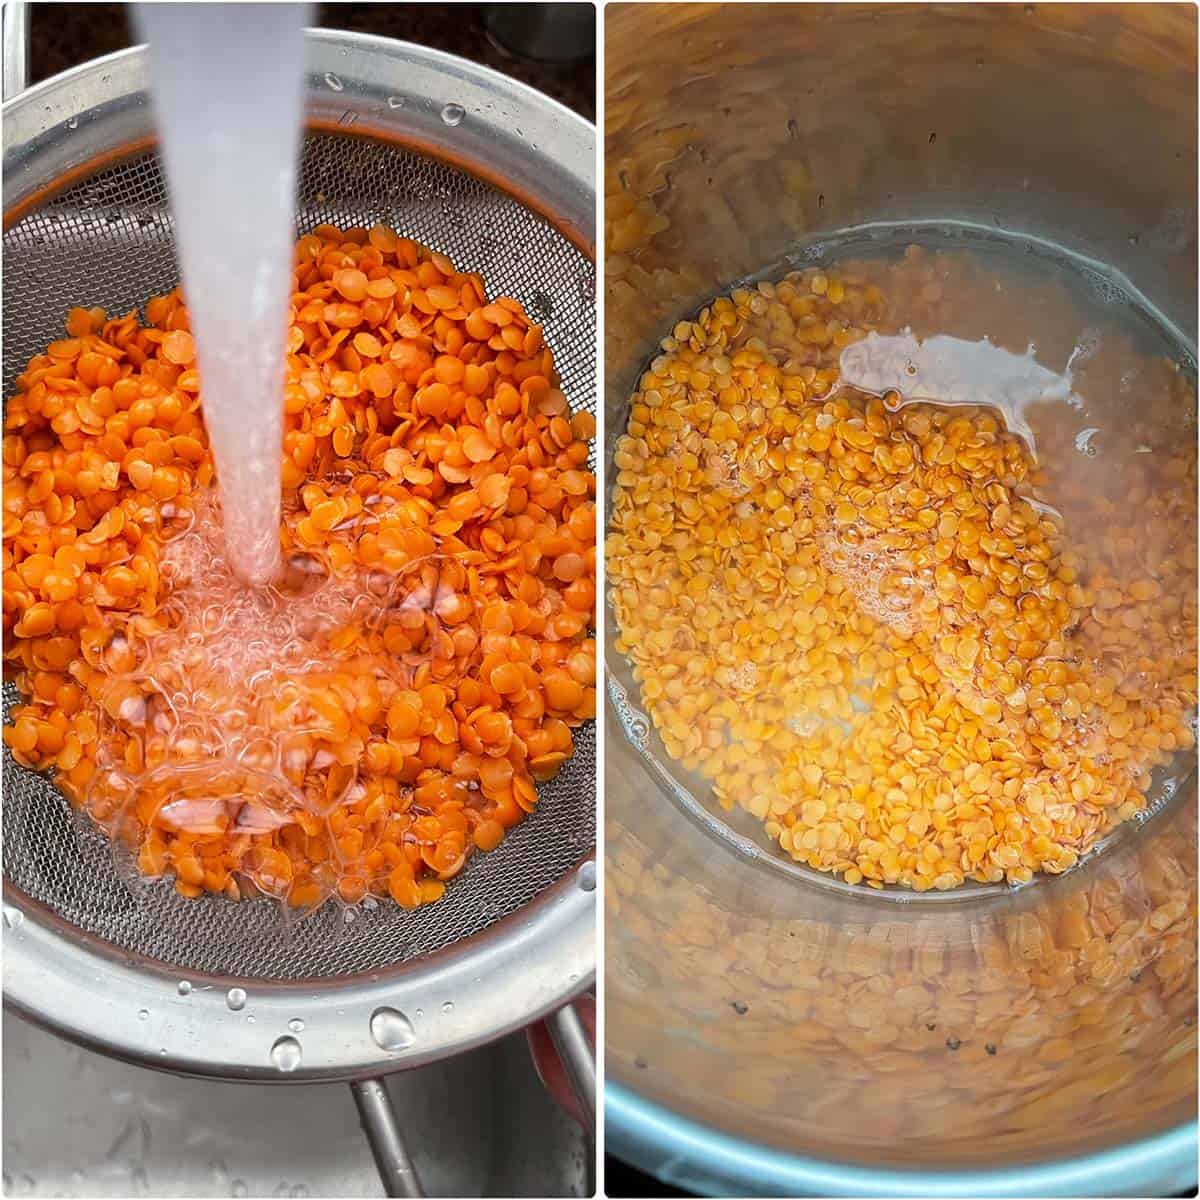 2 panel photo showing the rinsing of lentils and adding to pot with water.